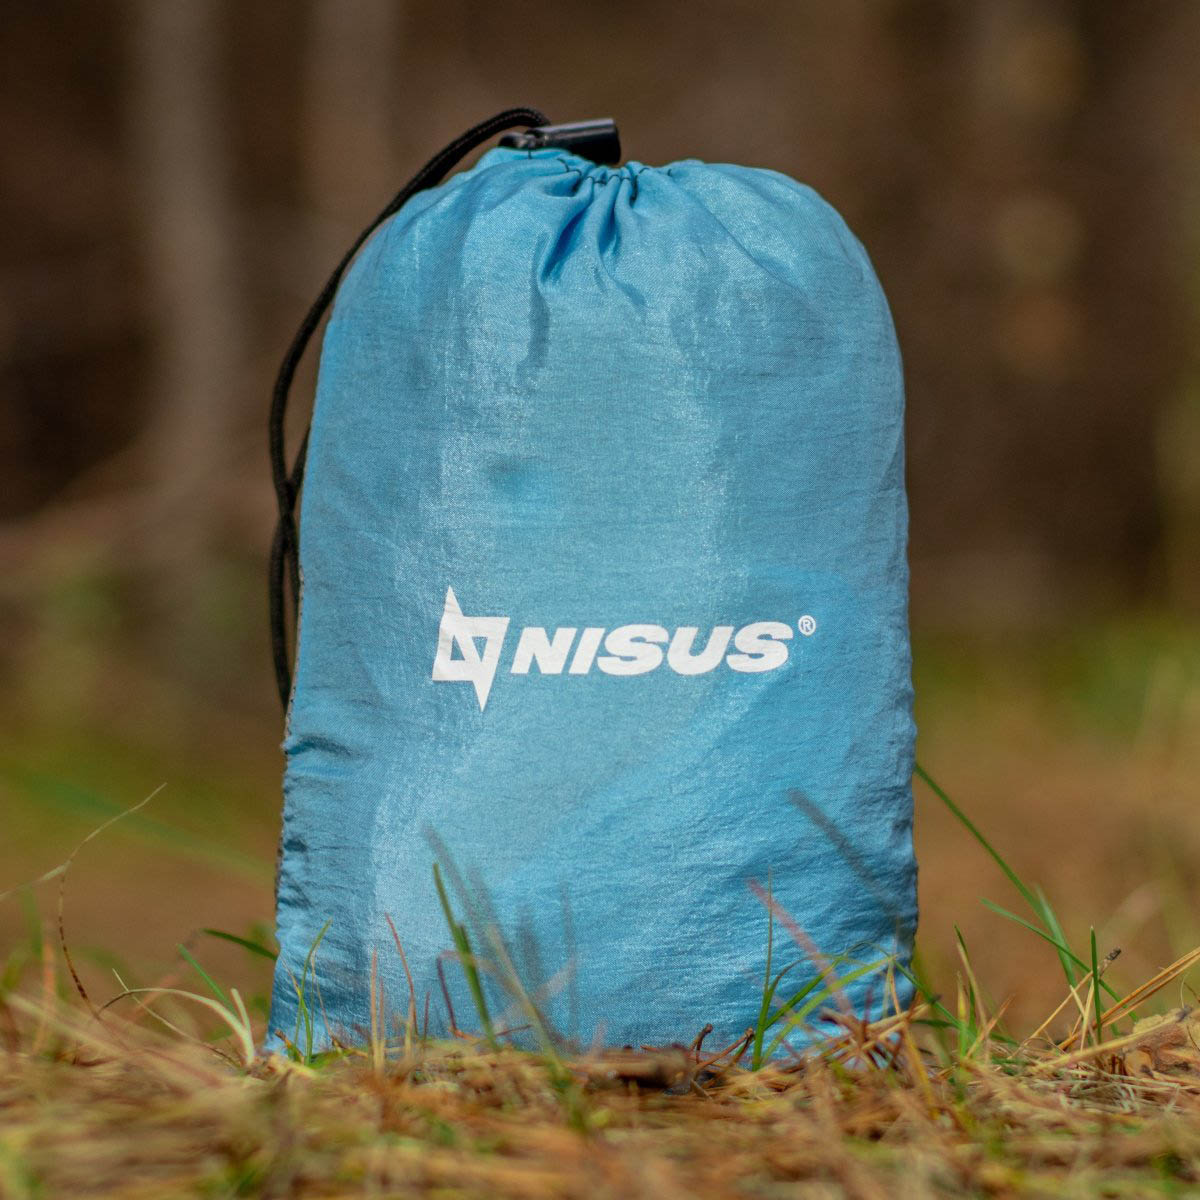 Nisus blue carry bag for a camping hammock